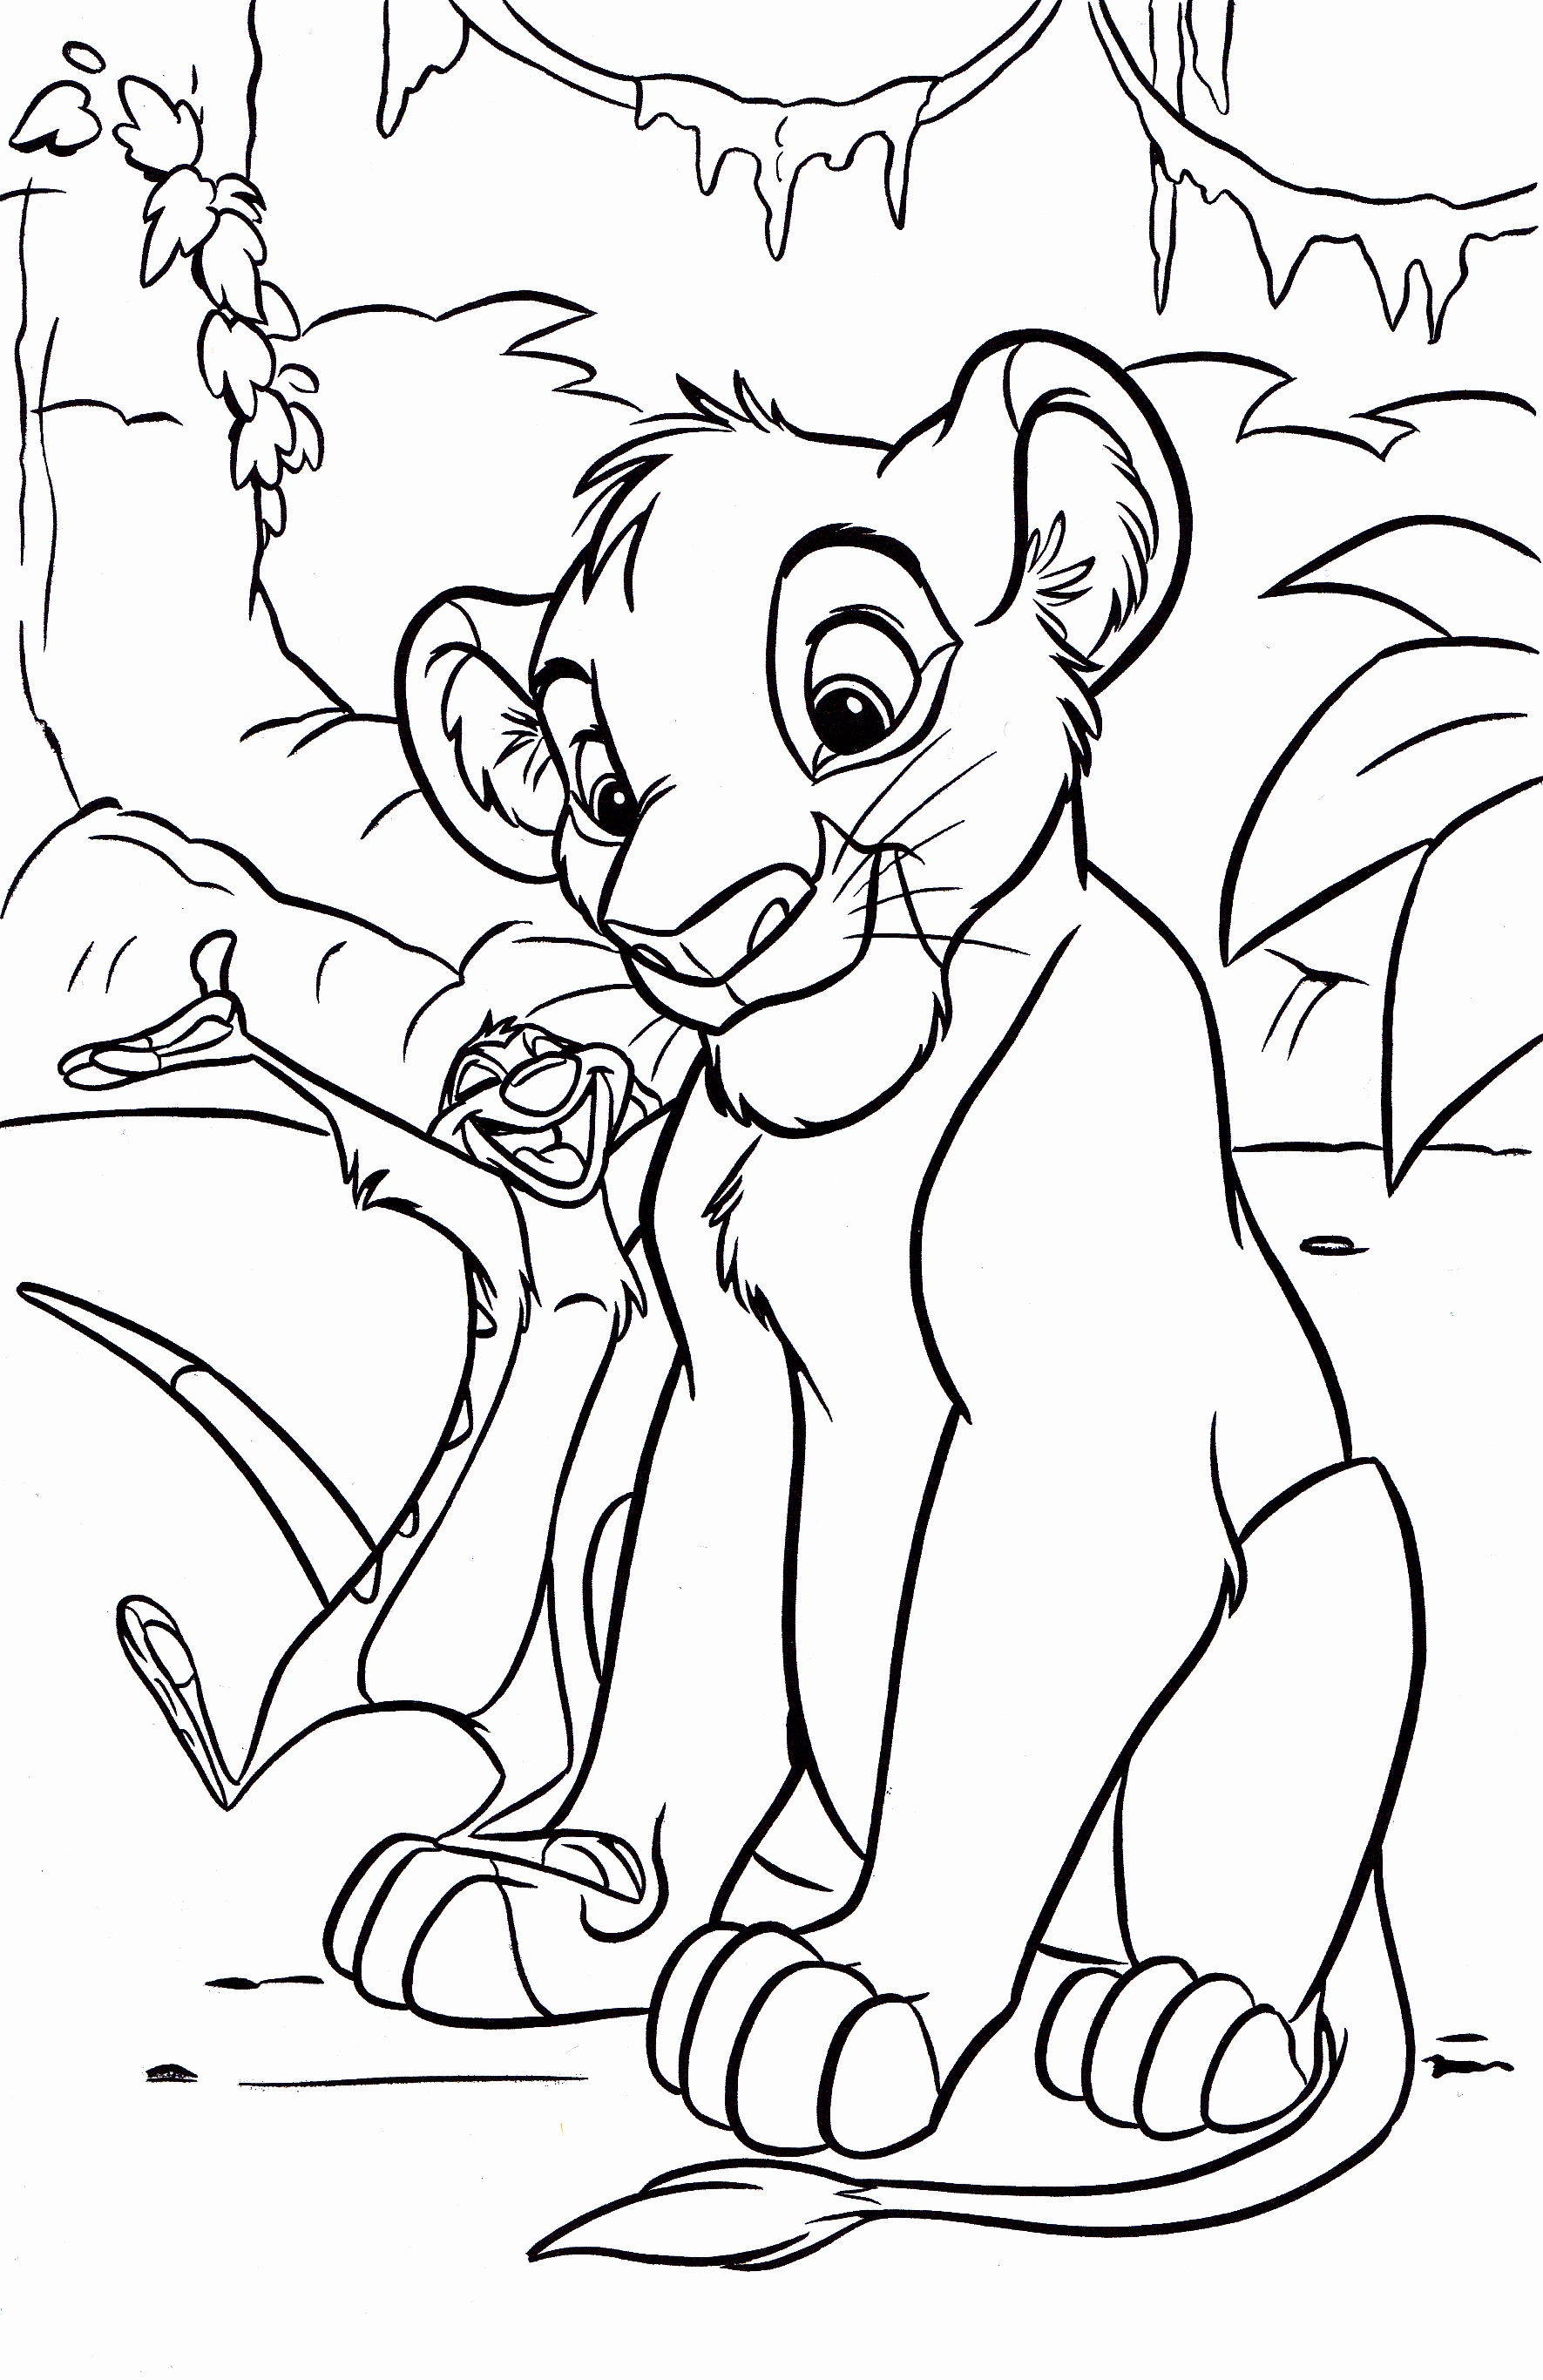 images of lion king coloring book pages - photo #28